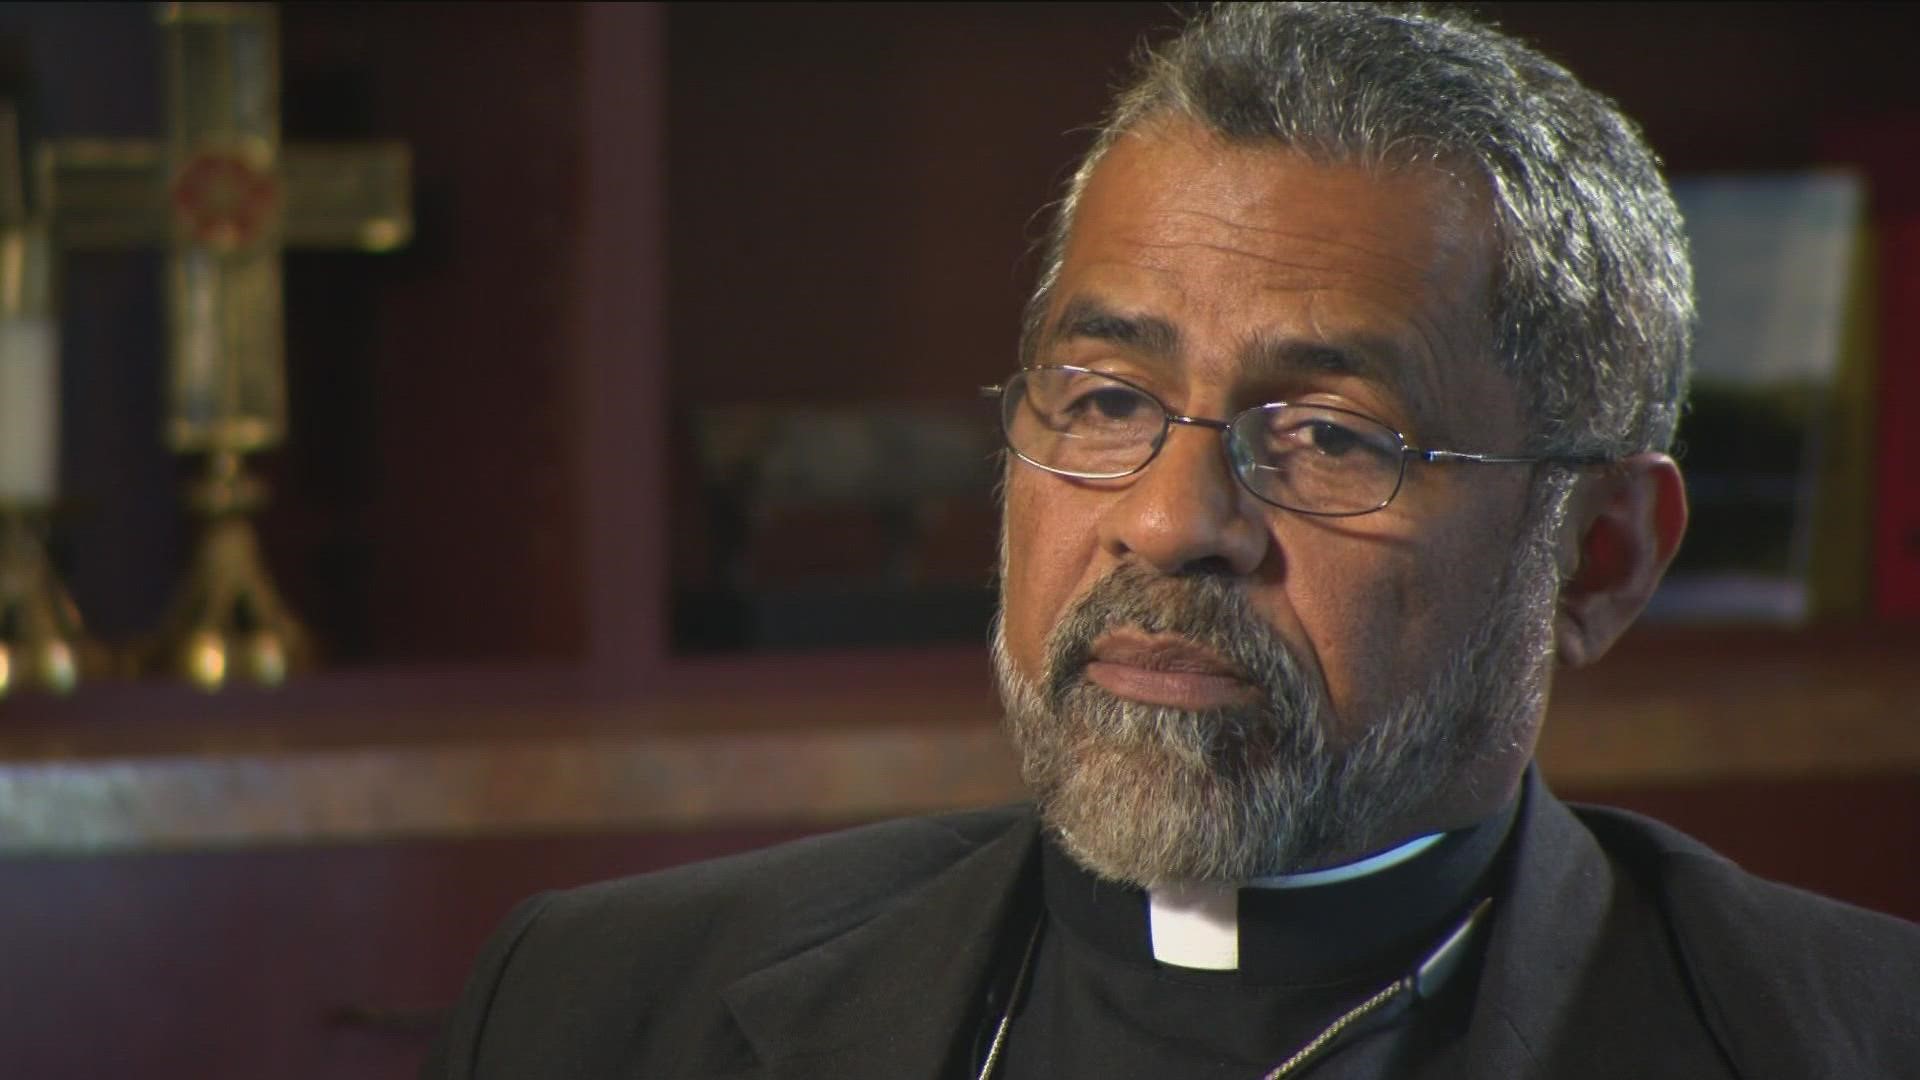 Bishop Tharakan was born in India and raised as a devout Roman Catholic. He said he wanted to become a priest at the age of 5, after his sister passed away.